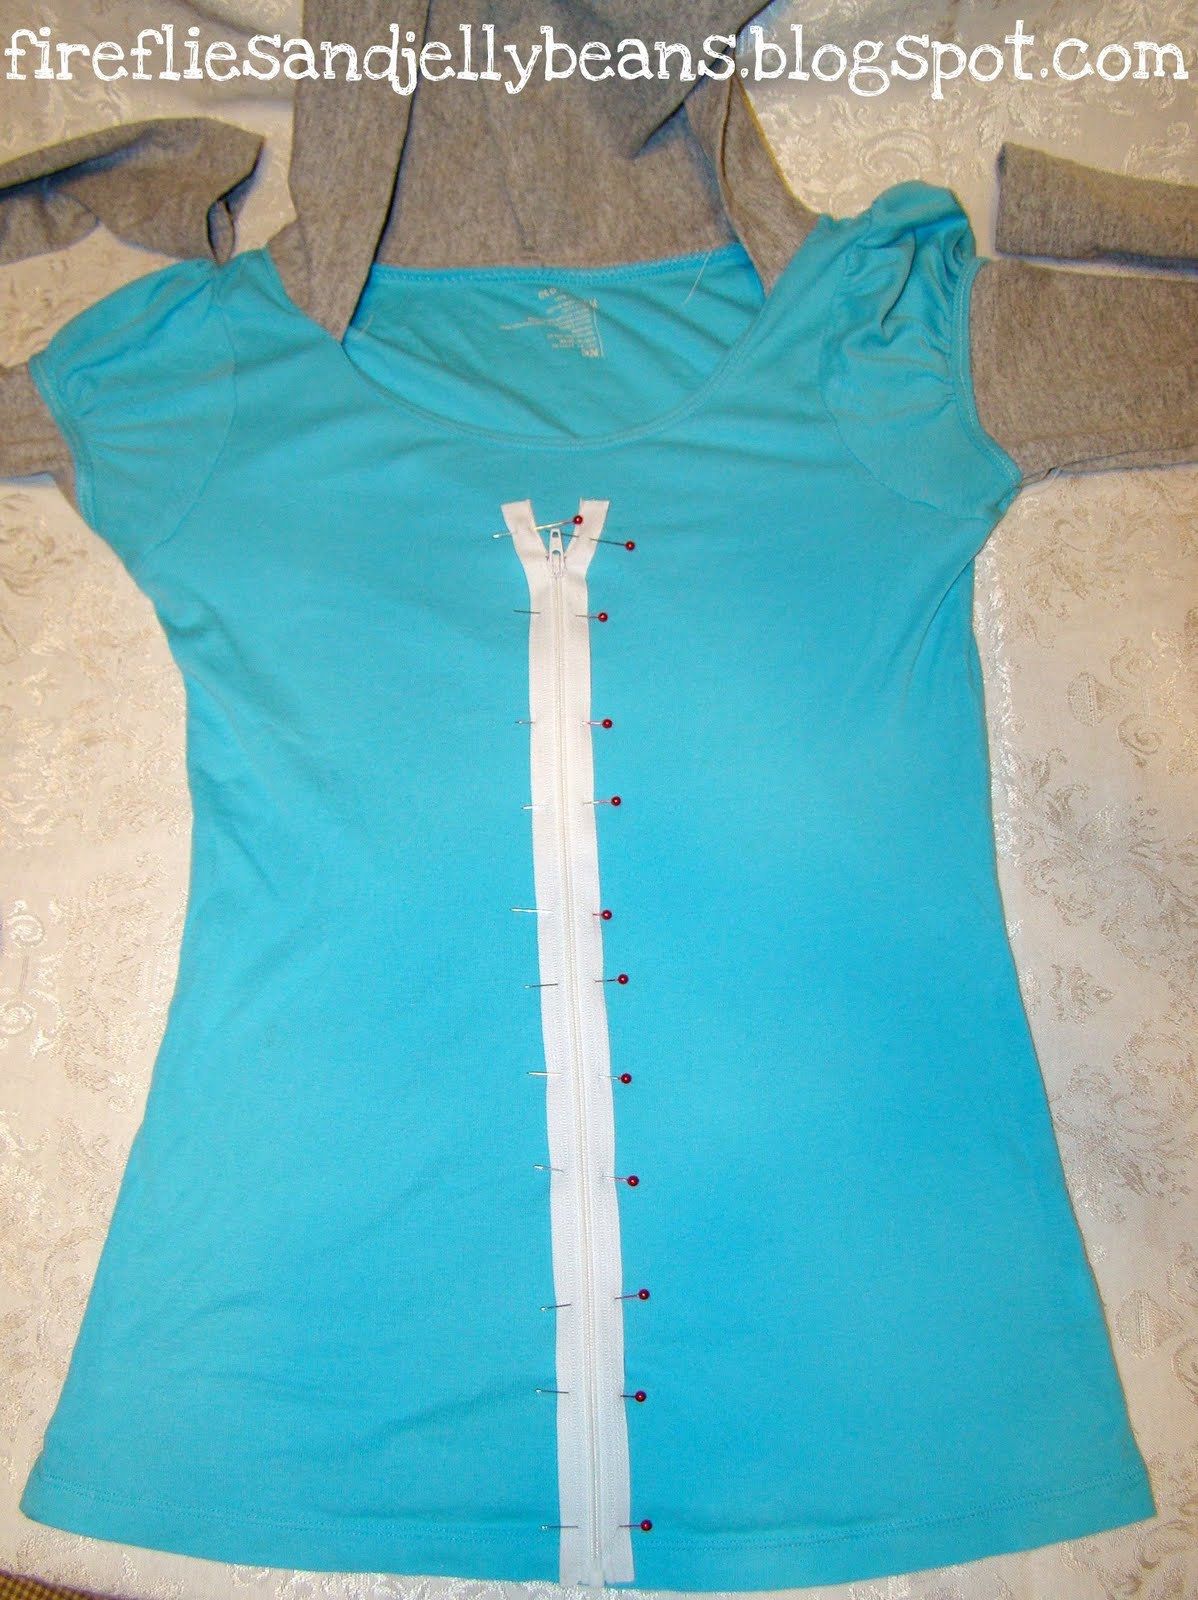 How to sew an exposed zipper to refashion a shirt bigger